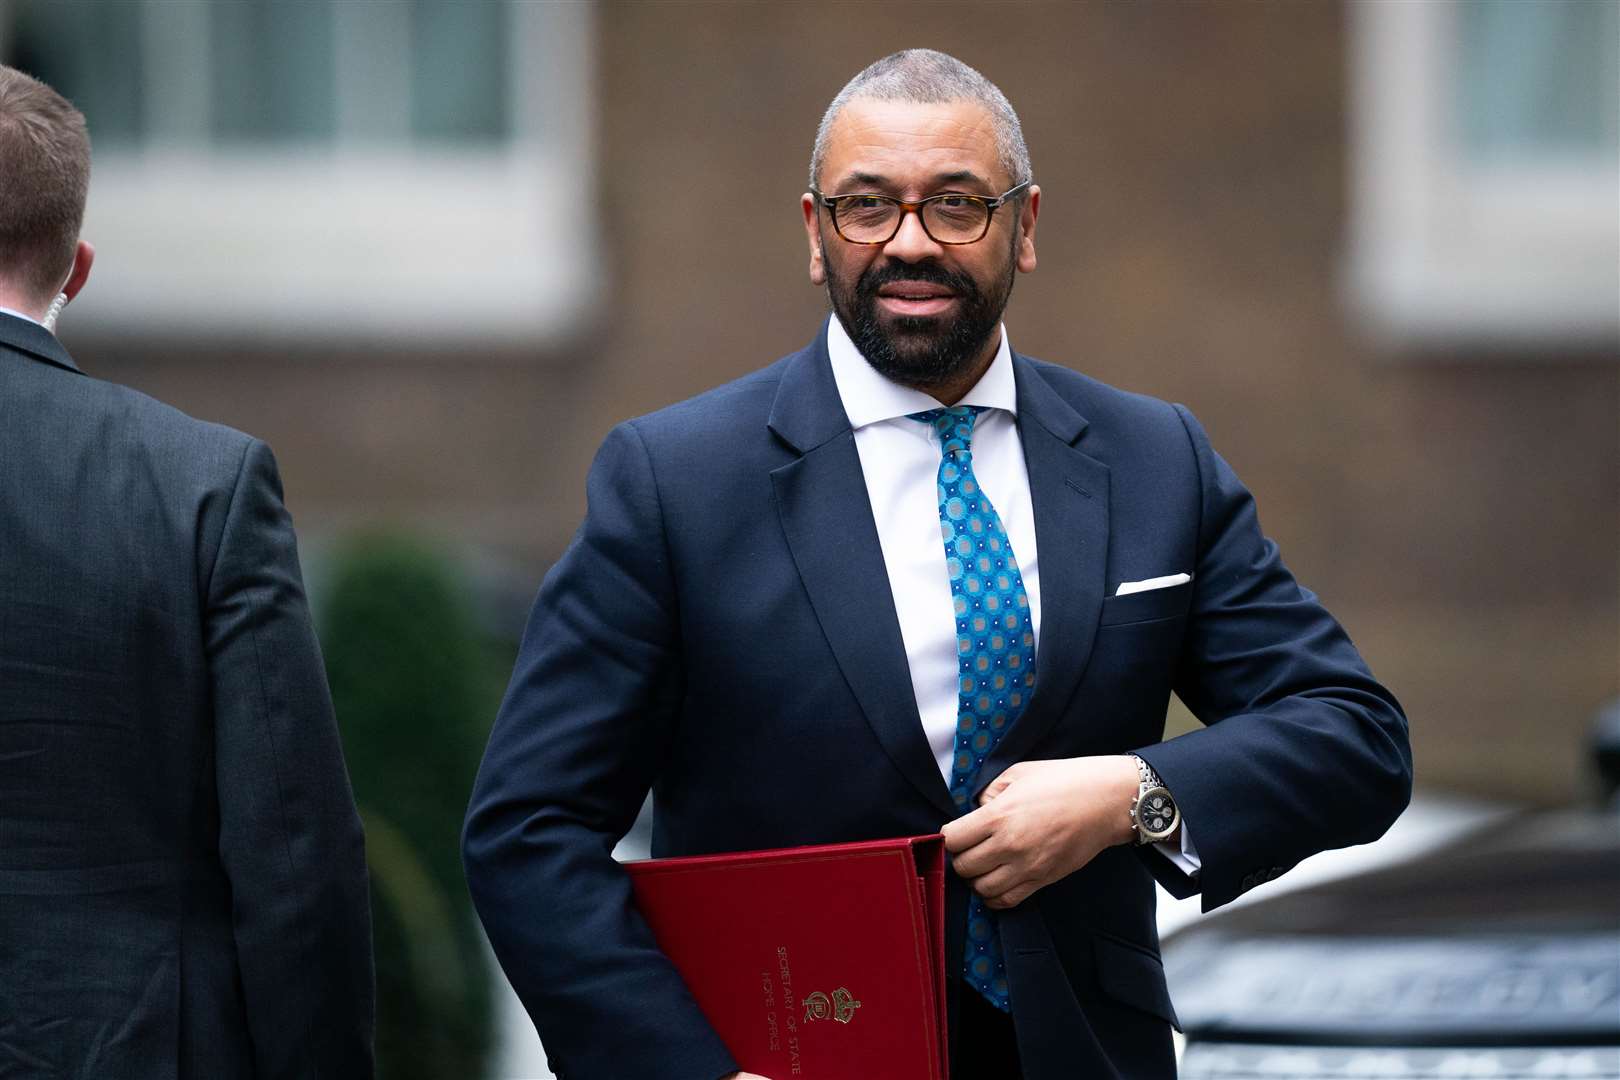 Home Secretary James Cleverly was said to have lost confidence in David Neal prior to his sacking (PA)